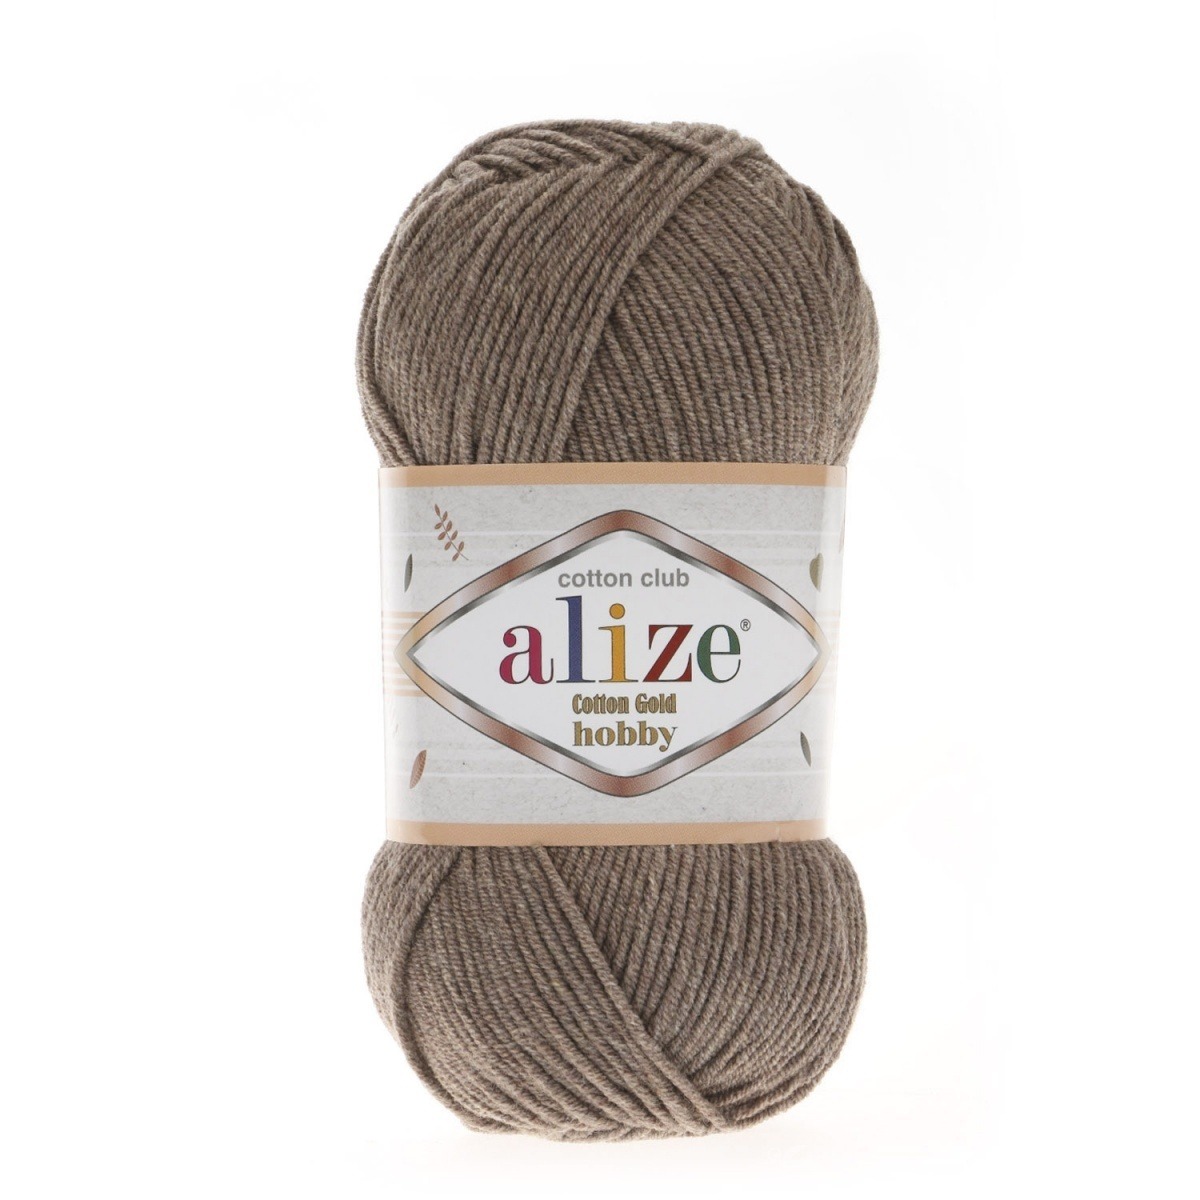 Alize "Cotton gold hobby" (688)